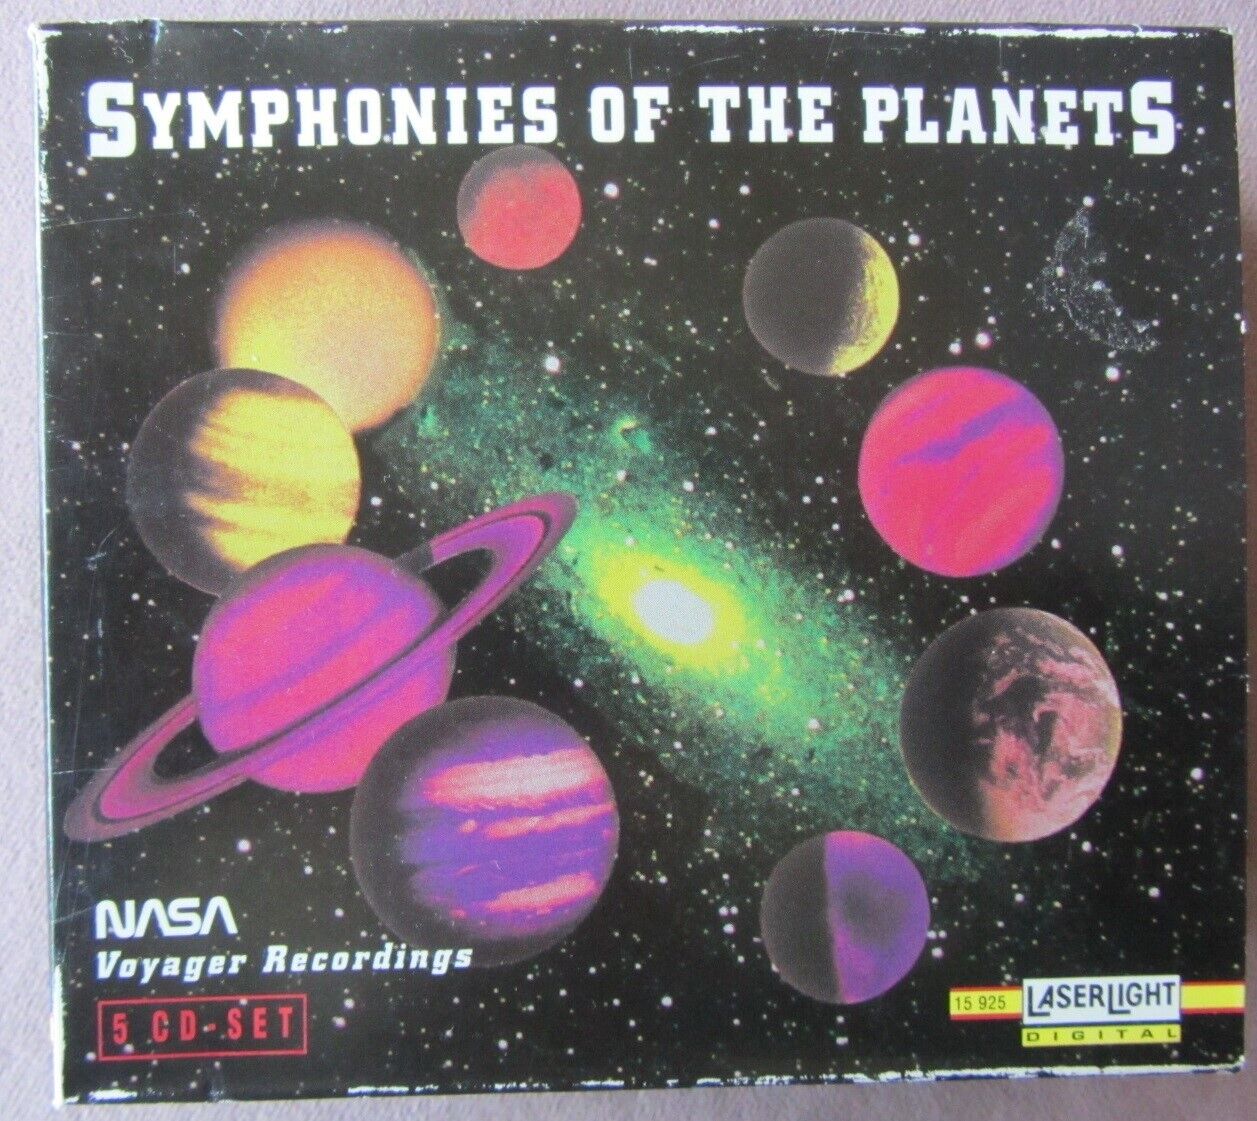 Rare Full Set Symphonies of the Planets 5 CDs Set NASA Voyager Recordings 1993